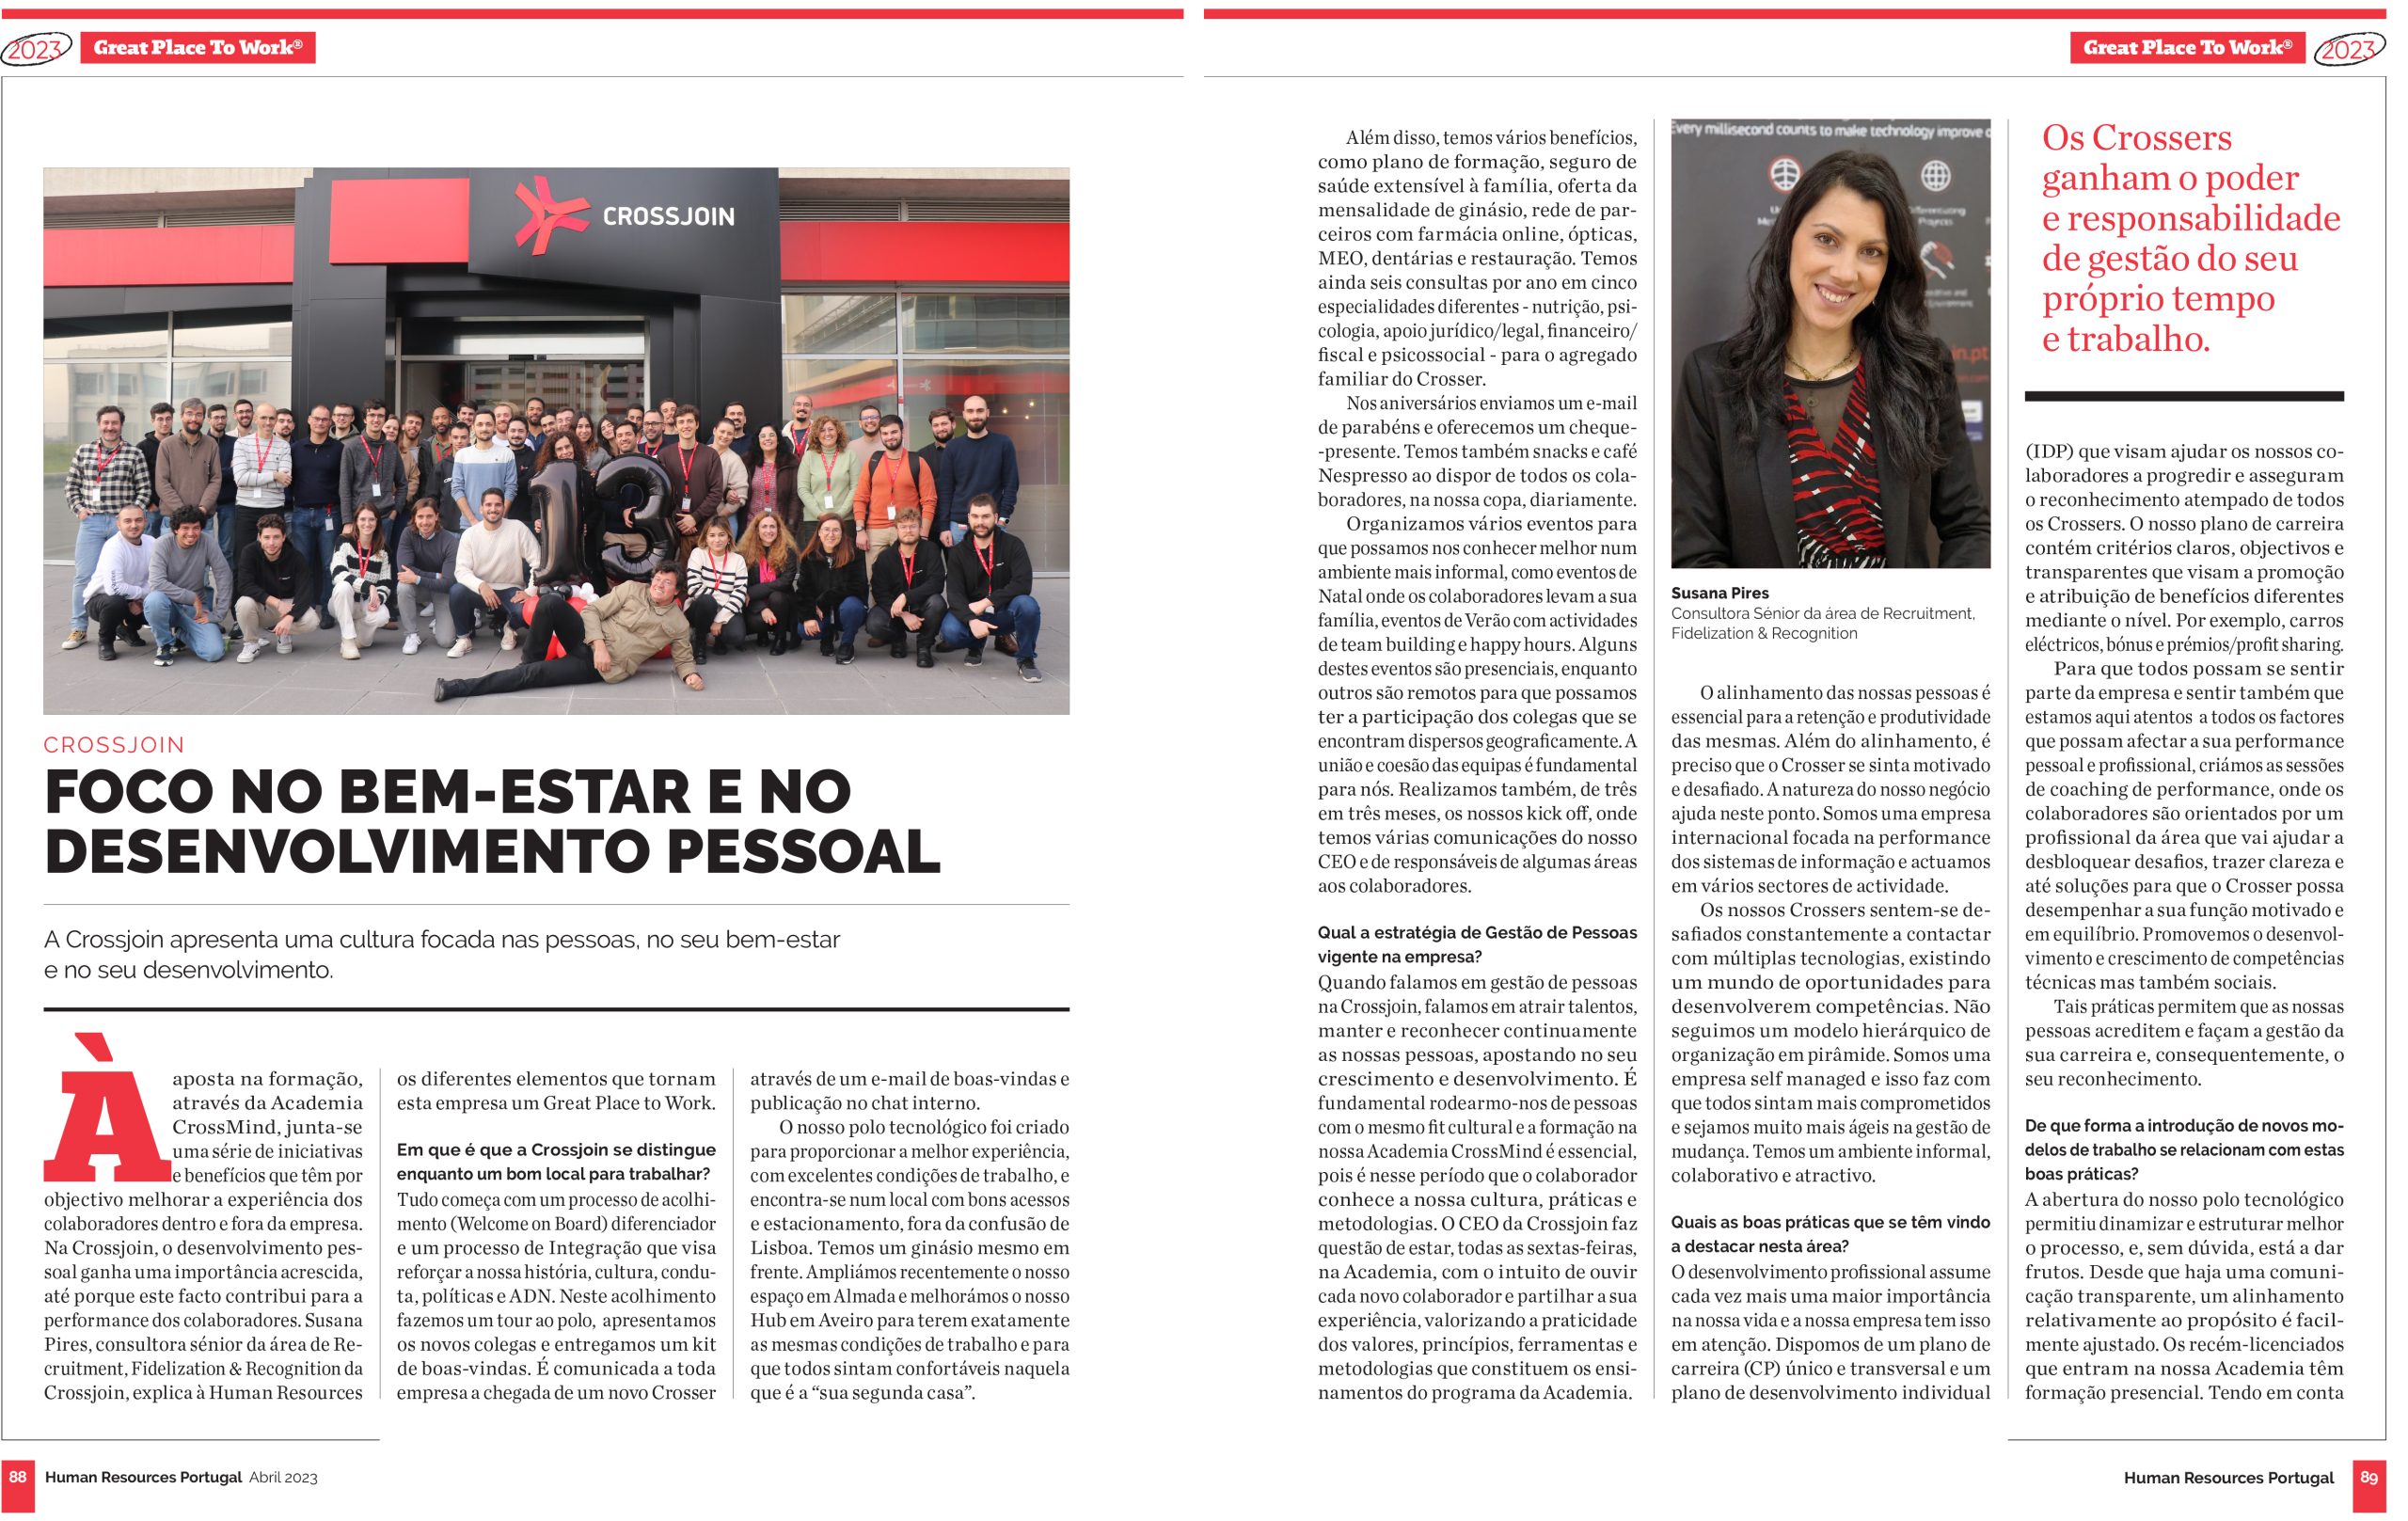 Crossjoin como Great Place to Work na Revista Human Resources